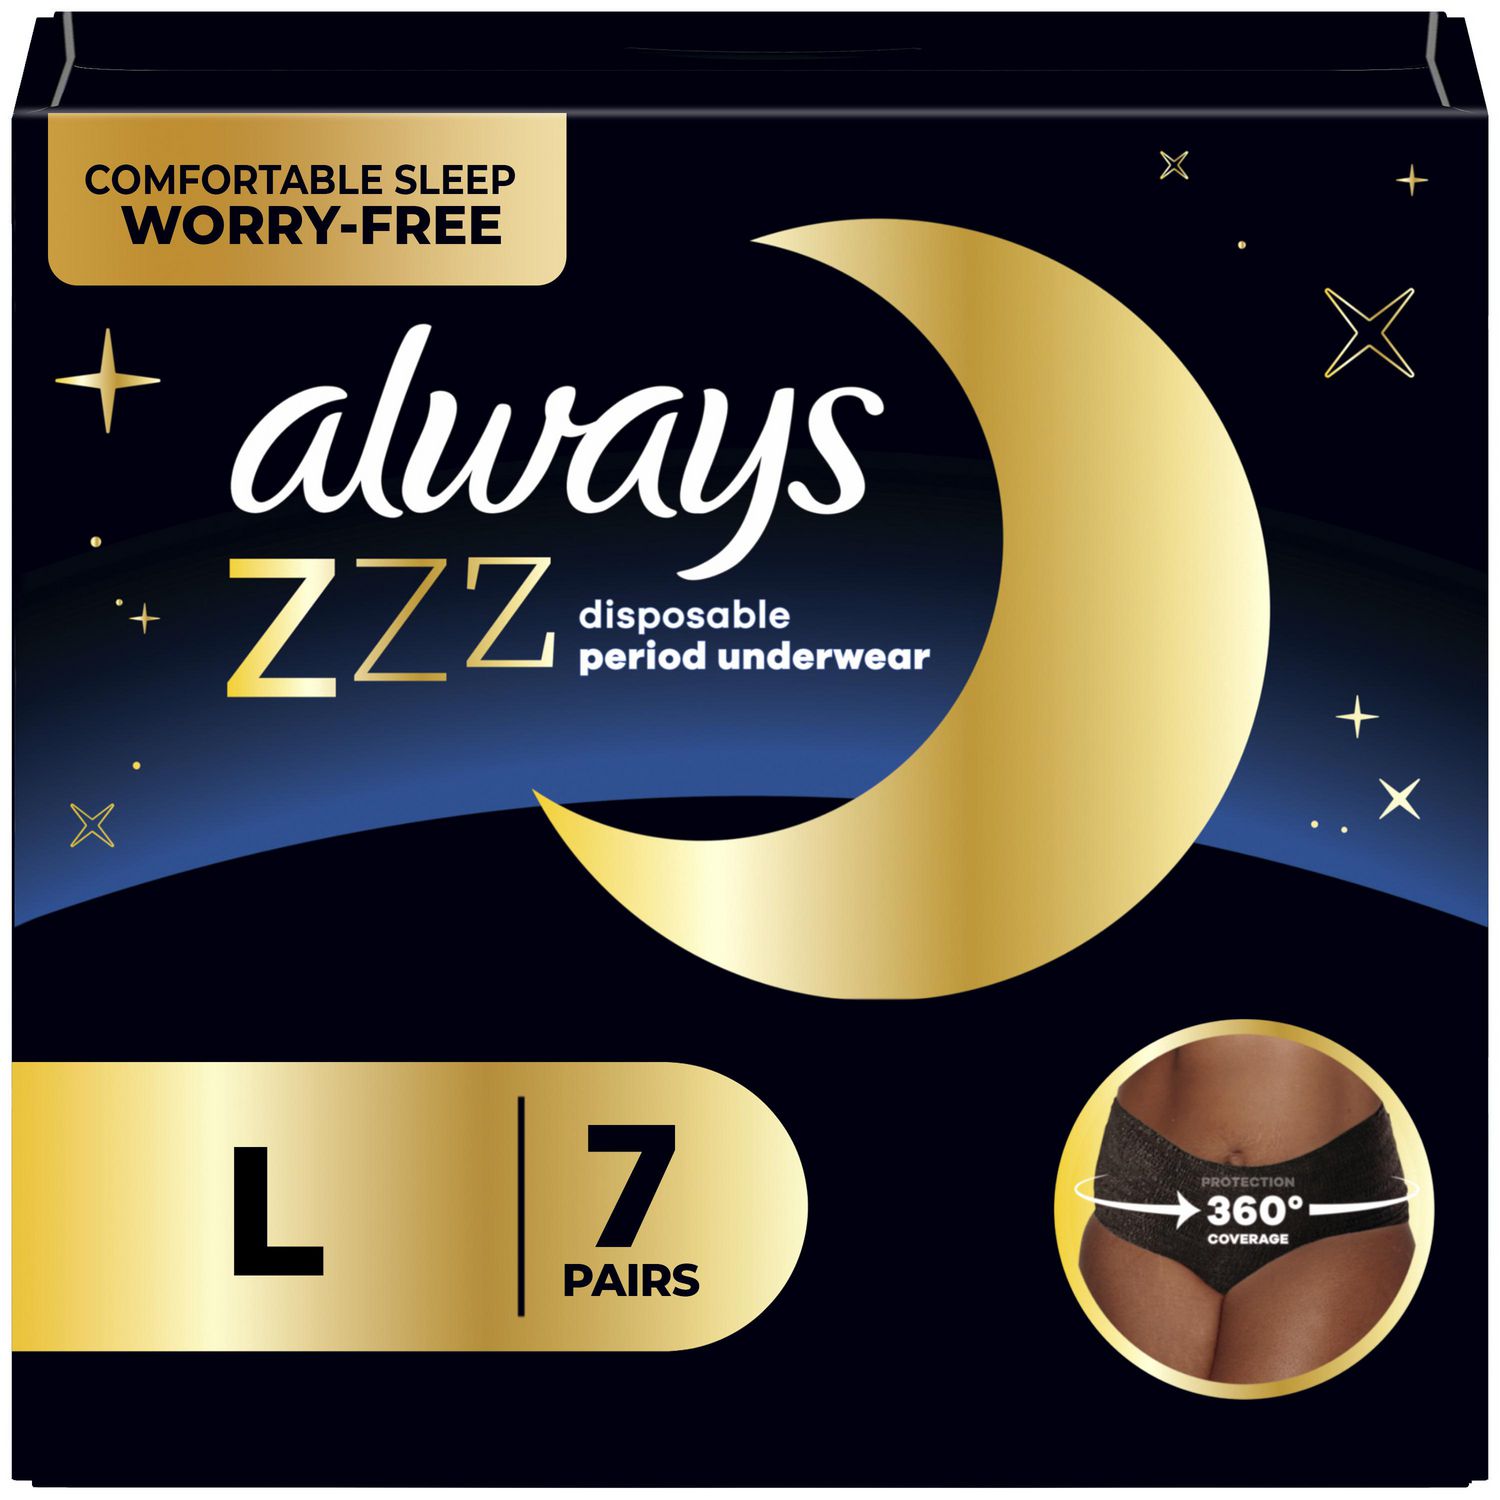  Always ZZZs Overnight Disposable Period Underwear for Women,  Size S/M, Black Period Panties, Leakproof, 3 Count